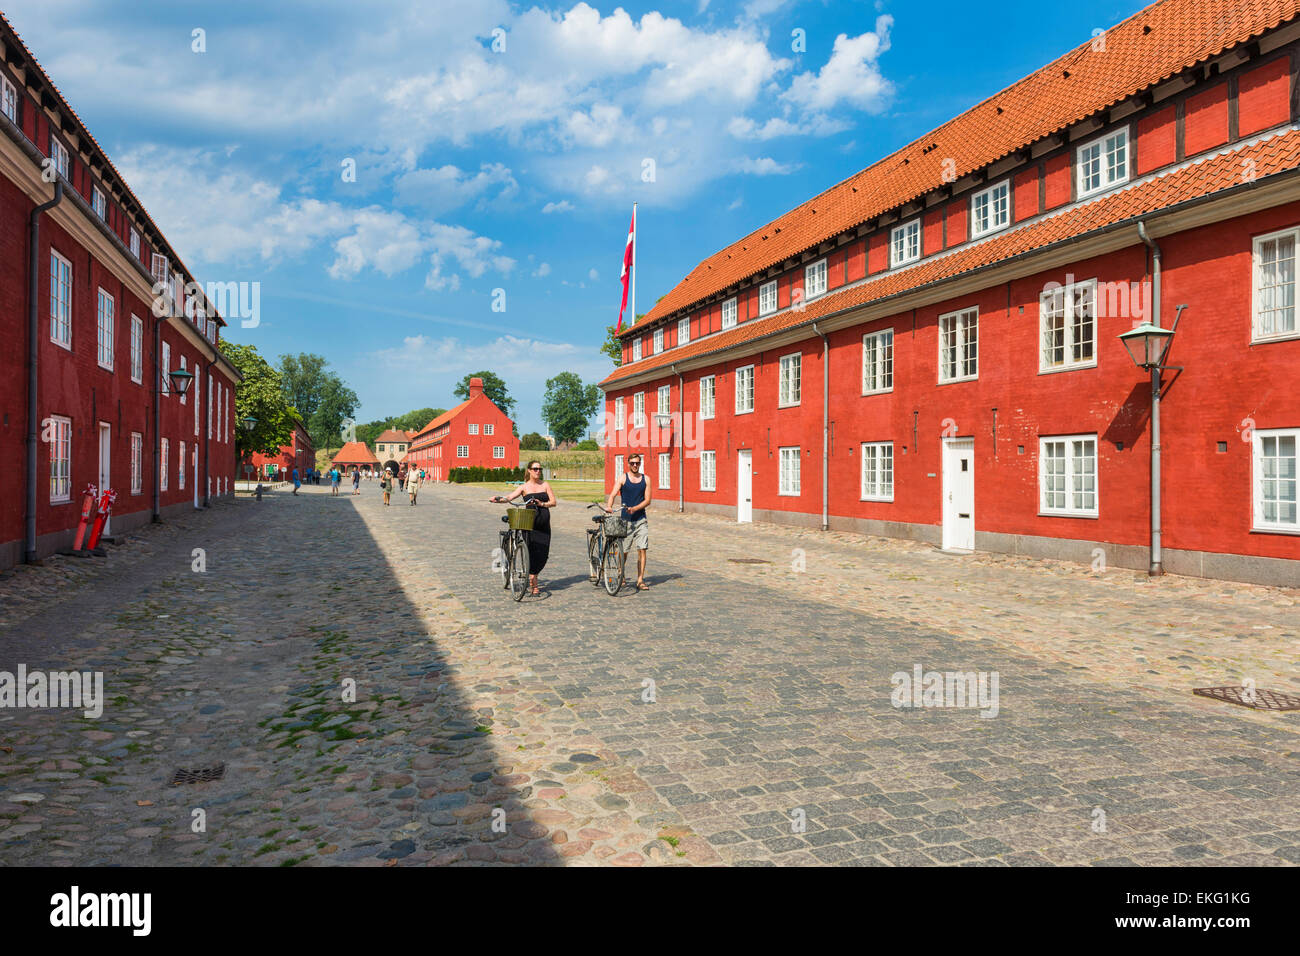 Main street in Kastellet, Copenhagen, a well-preserved star fortress.  The 'rows' are 2-storey terraces built as barracks. Stock Photo